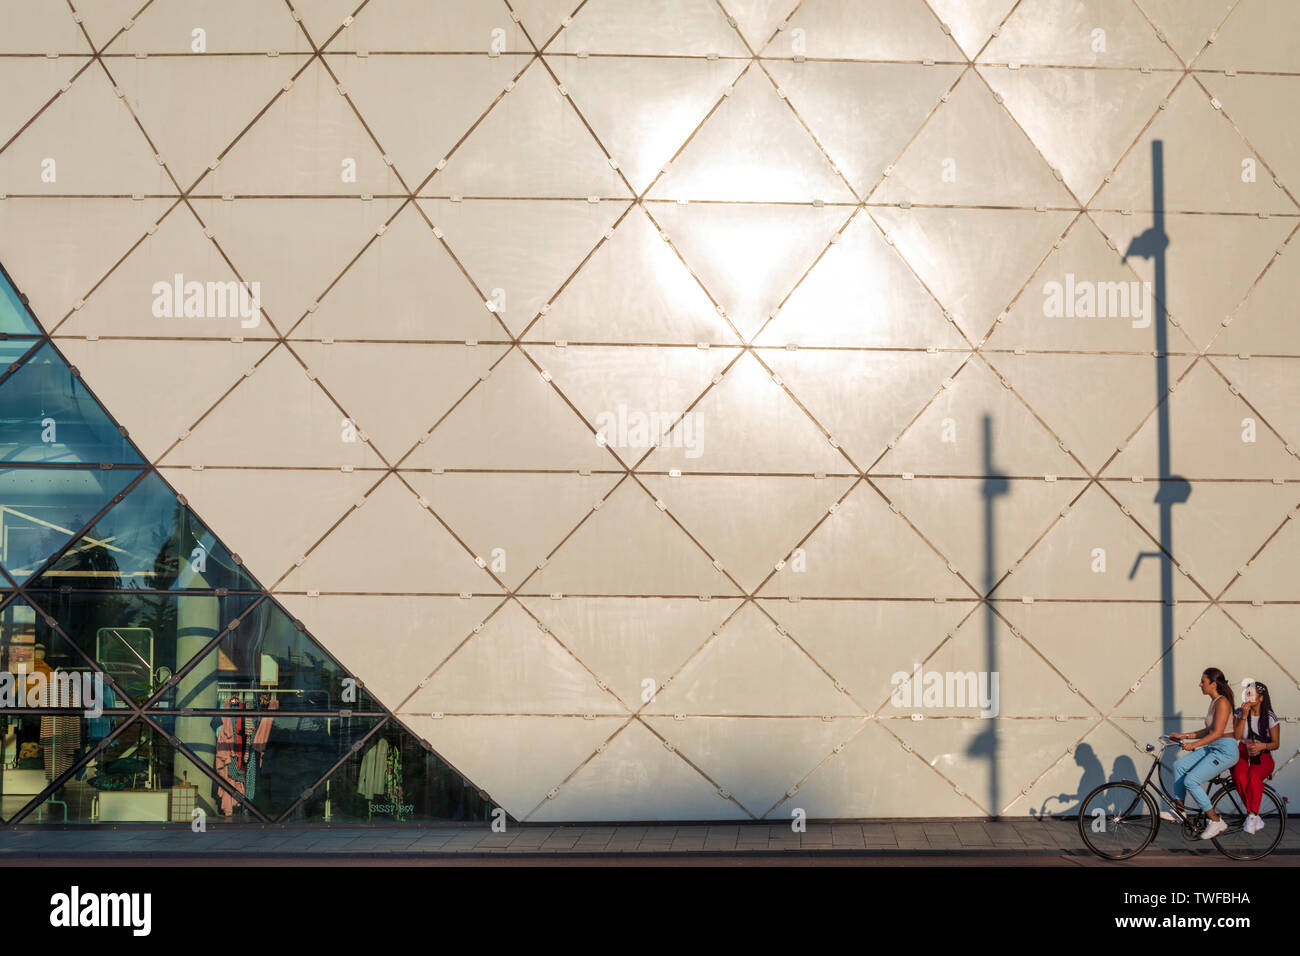 Two young women on a bicycle ride past the geometric facade of The Blob building in Eindhoven at dusk. Stock Photo